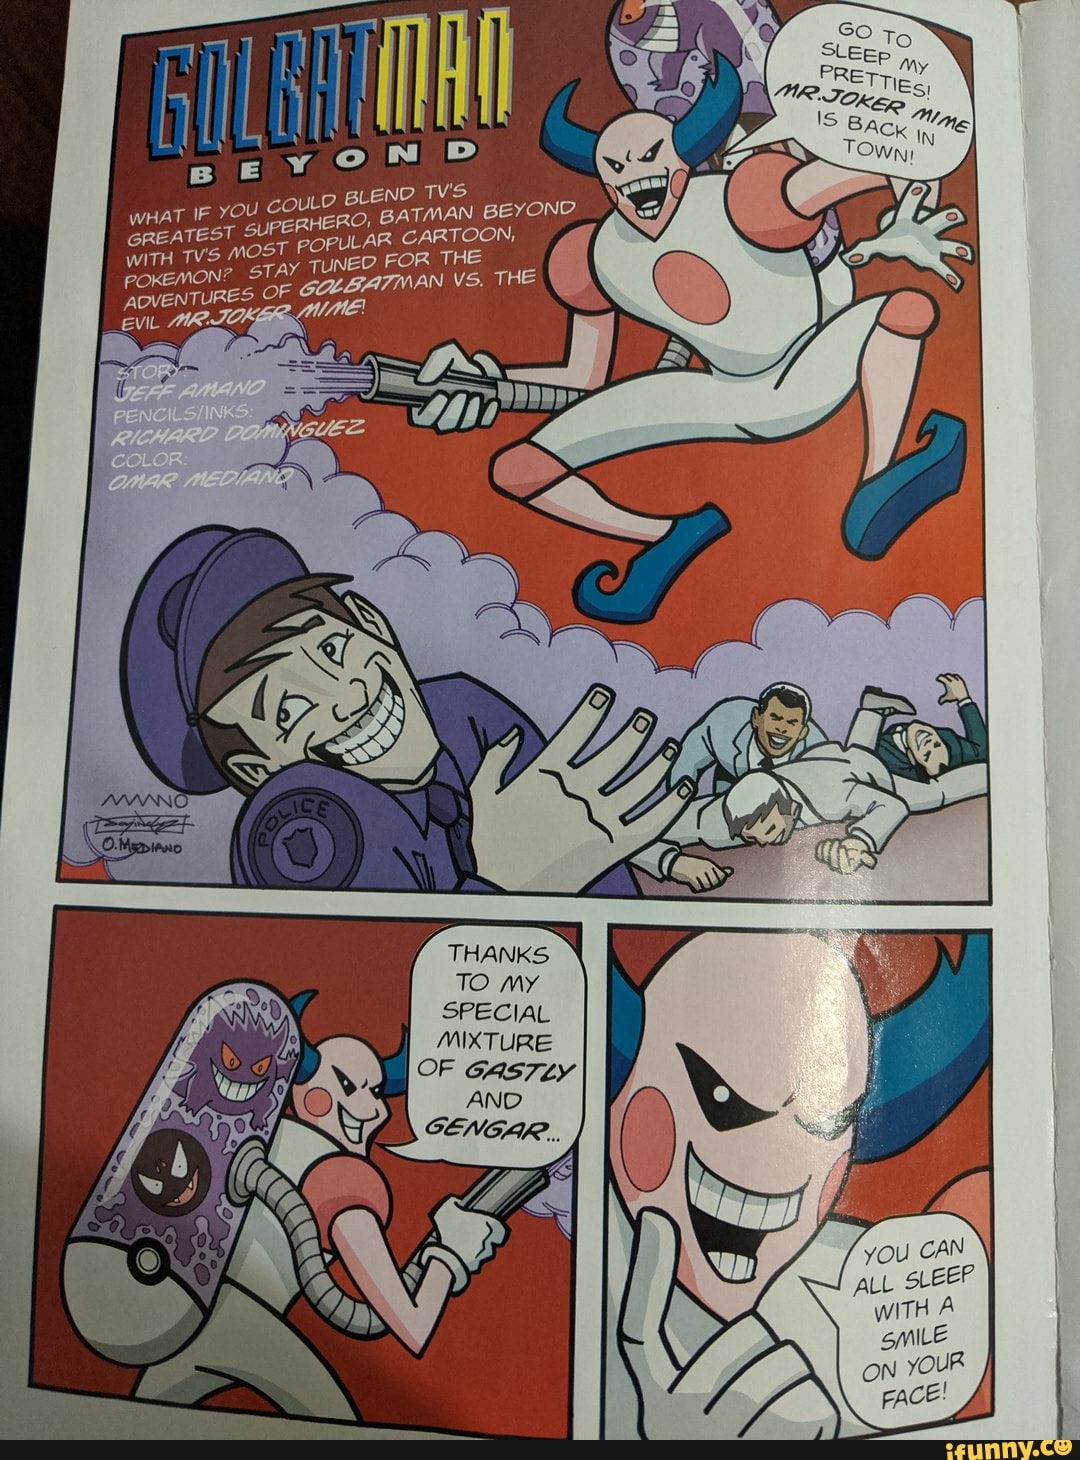 GolbatMan Beyond! Found this really old Pokemon magazine and it had this  brilliant comic. - LO BLEND ERO, BATMAN BEYOND PULAR CARTOON, NED FOR THE  you SUPERH OsT PO STAY TU WHAT